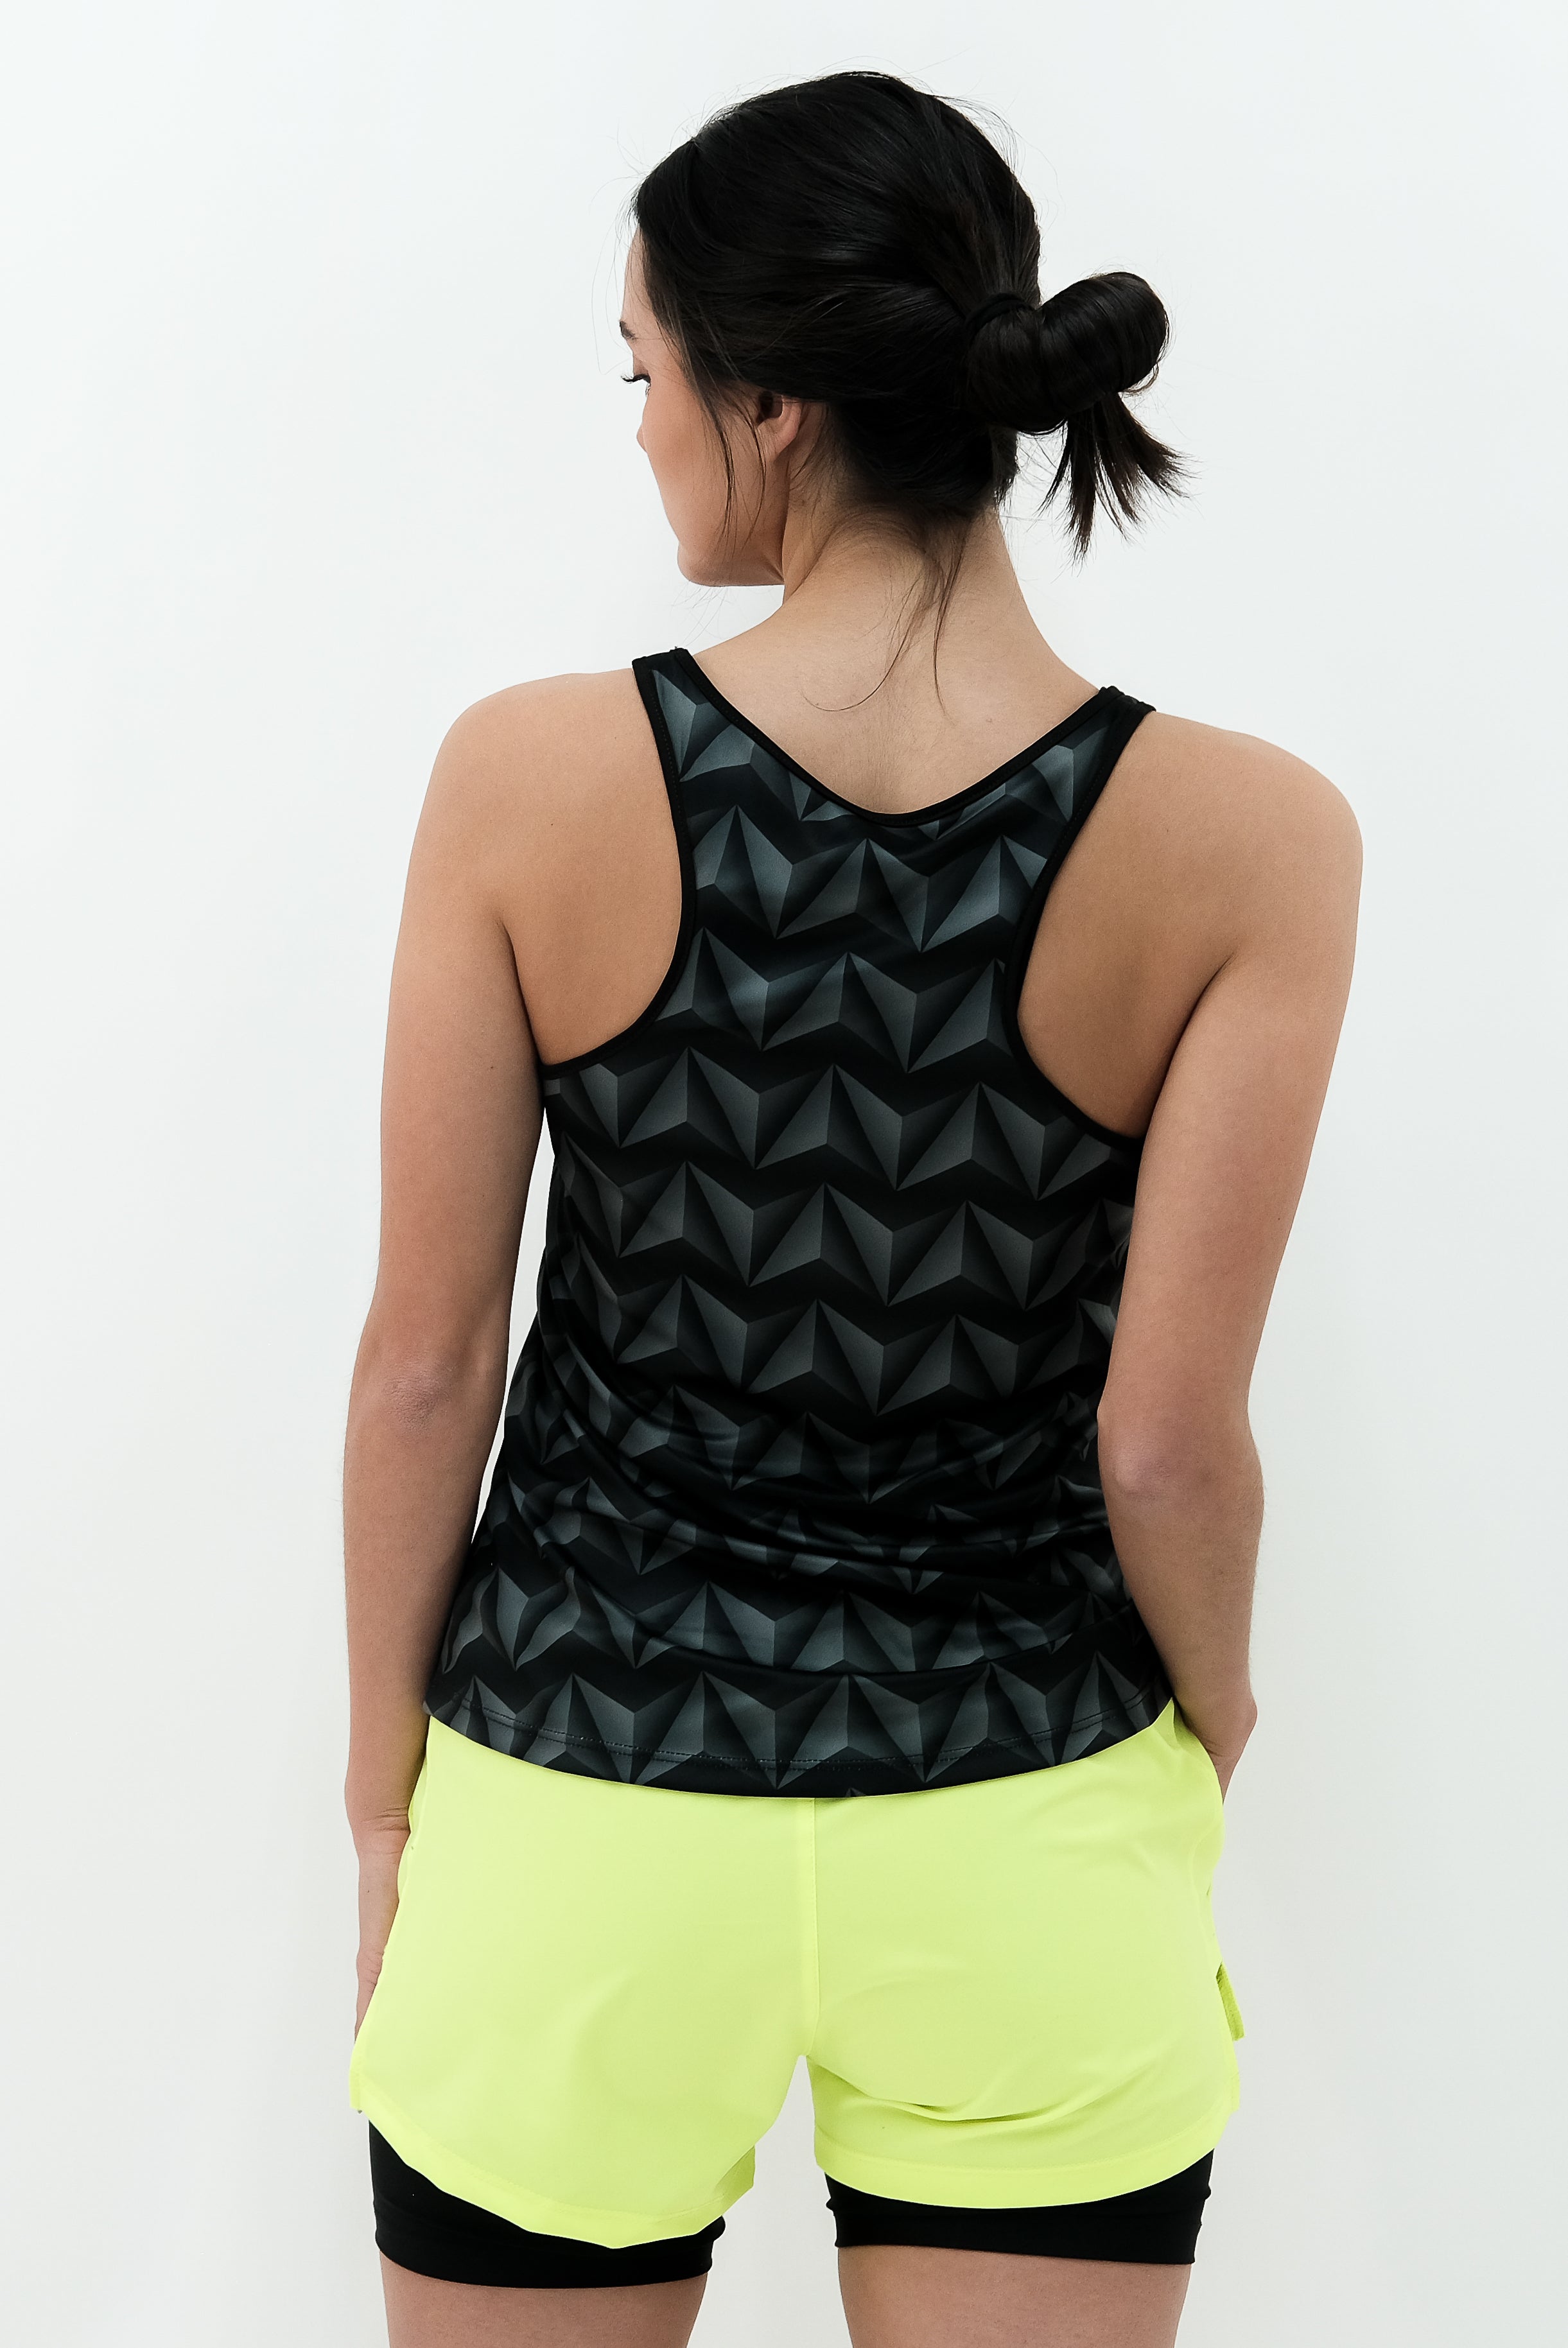 Women's Sleeveless T-shirt 3d Recycled Triangles